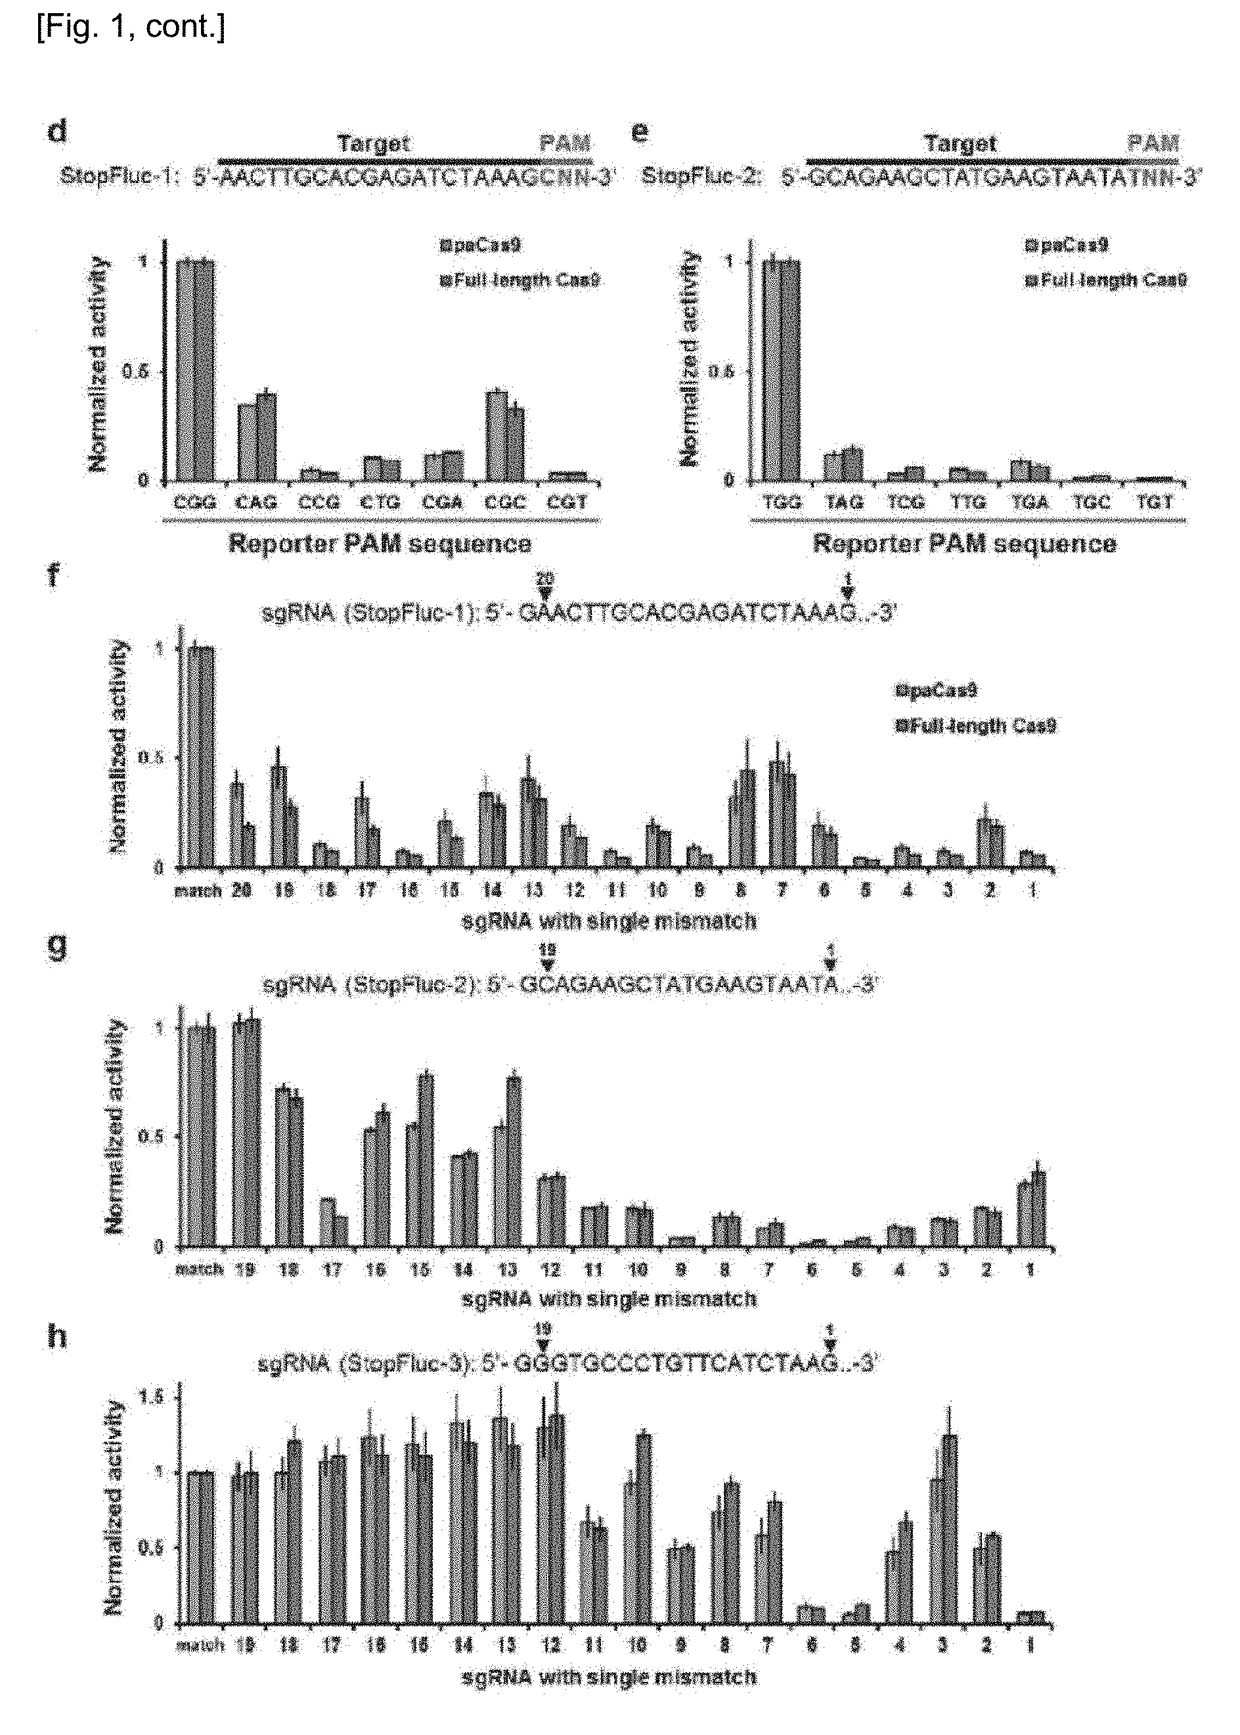 Set of Polypeptides Exhibiting Nuclease Activity or Nickase Activity with Dependence on Light or in Presence of Drug or Suppressing or Activating Expression of Target Gene